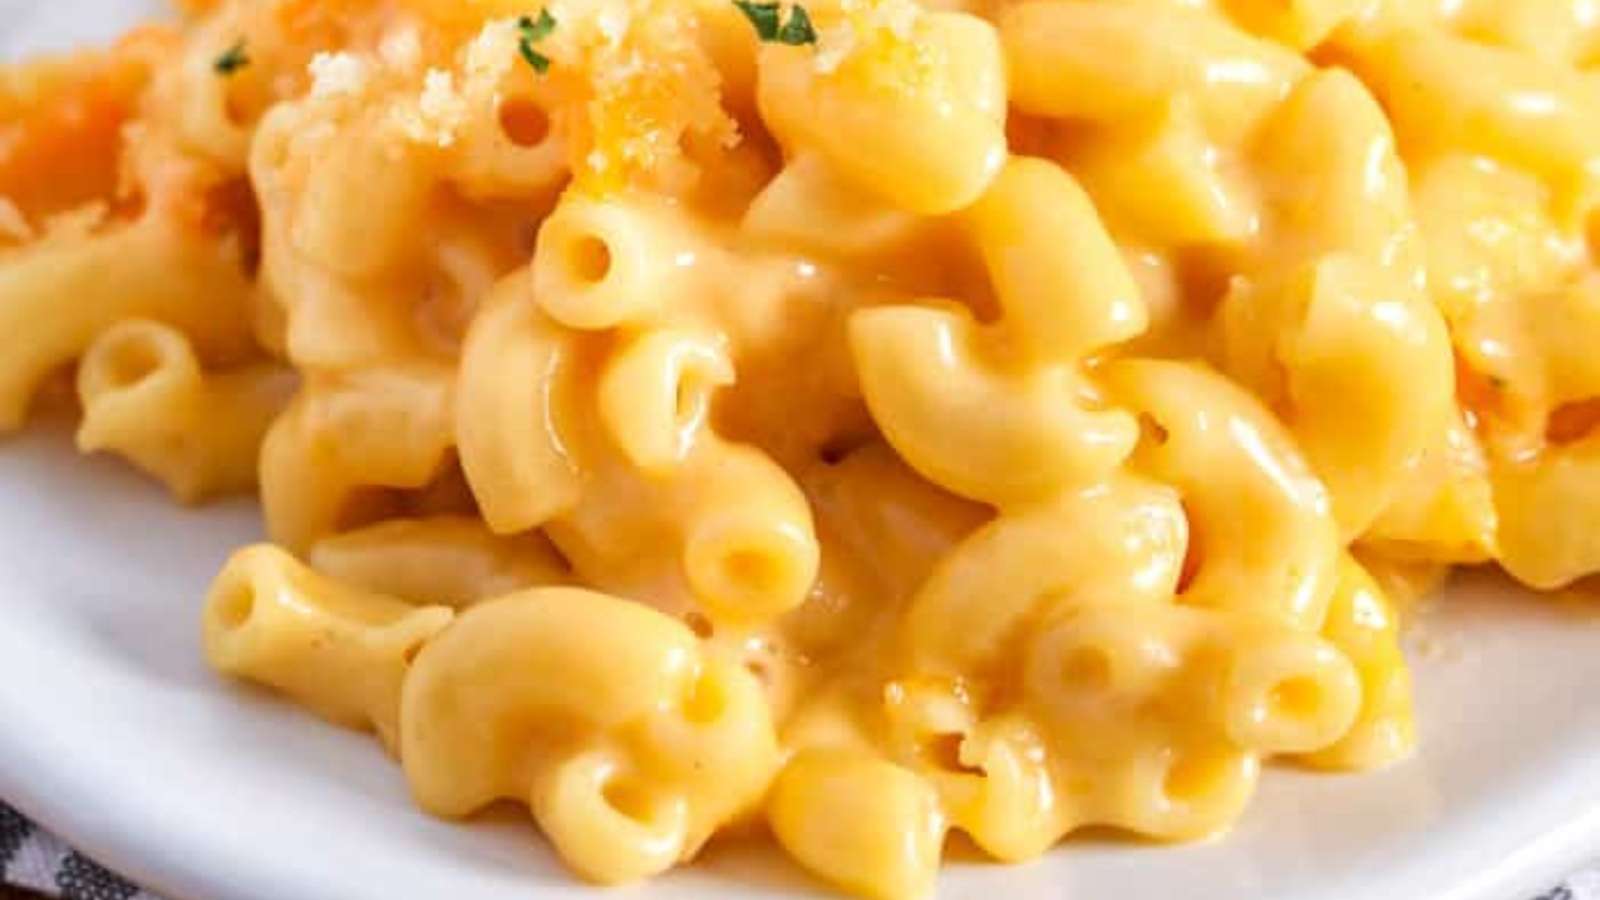 A plate of macaroni and cheese on a white plate.